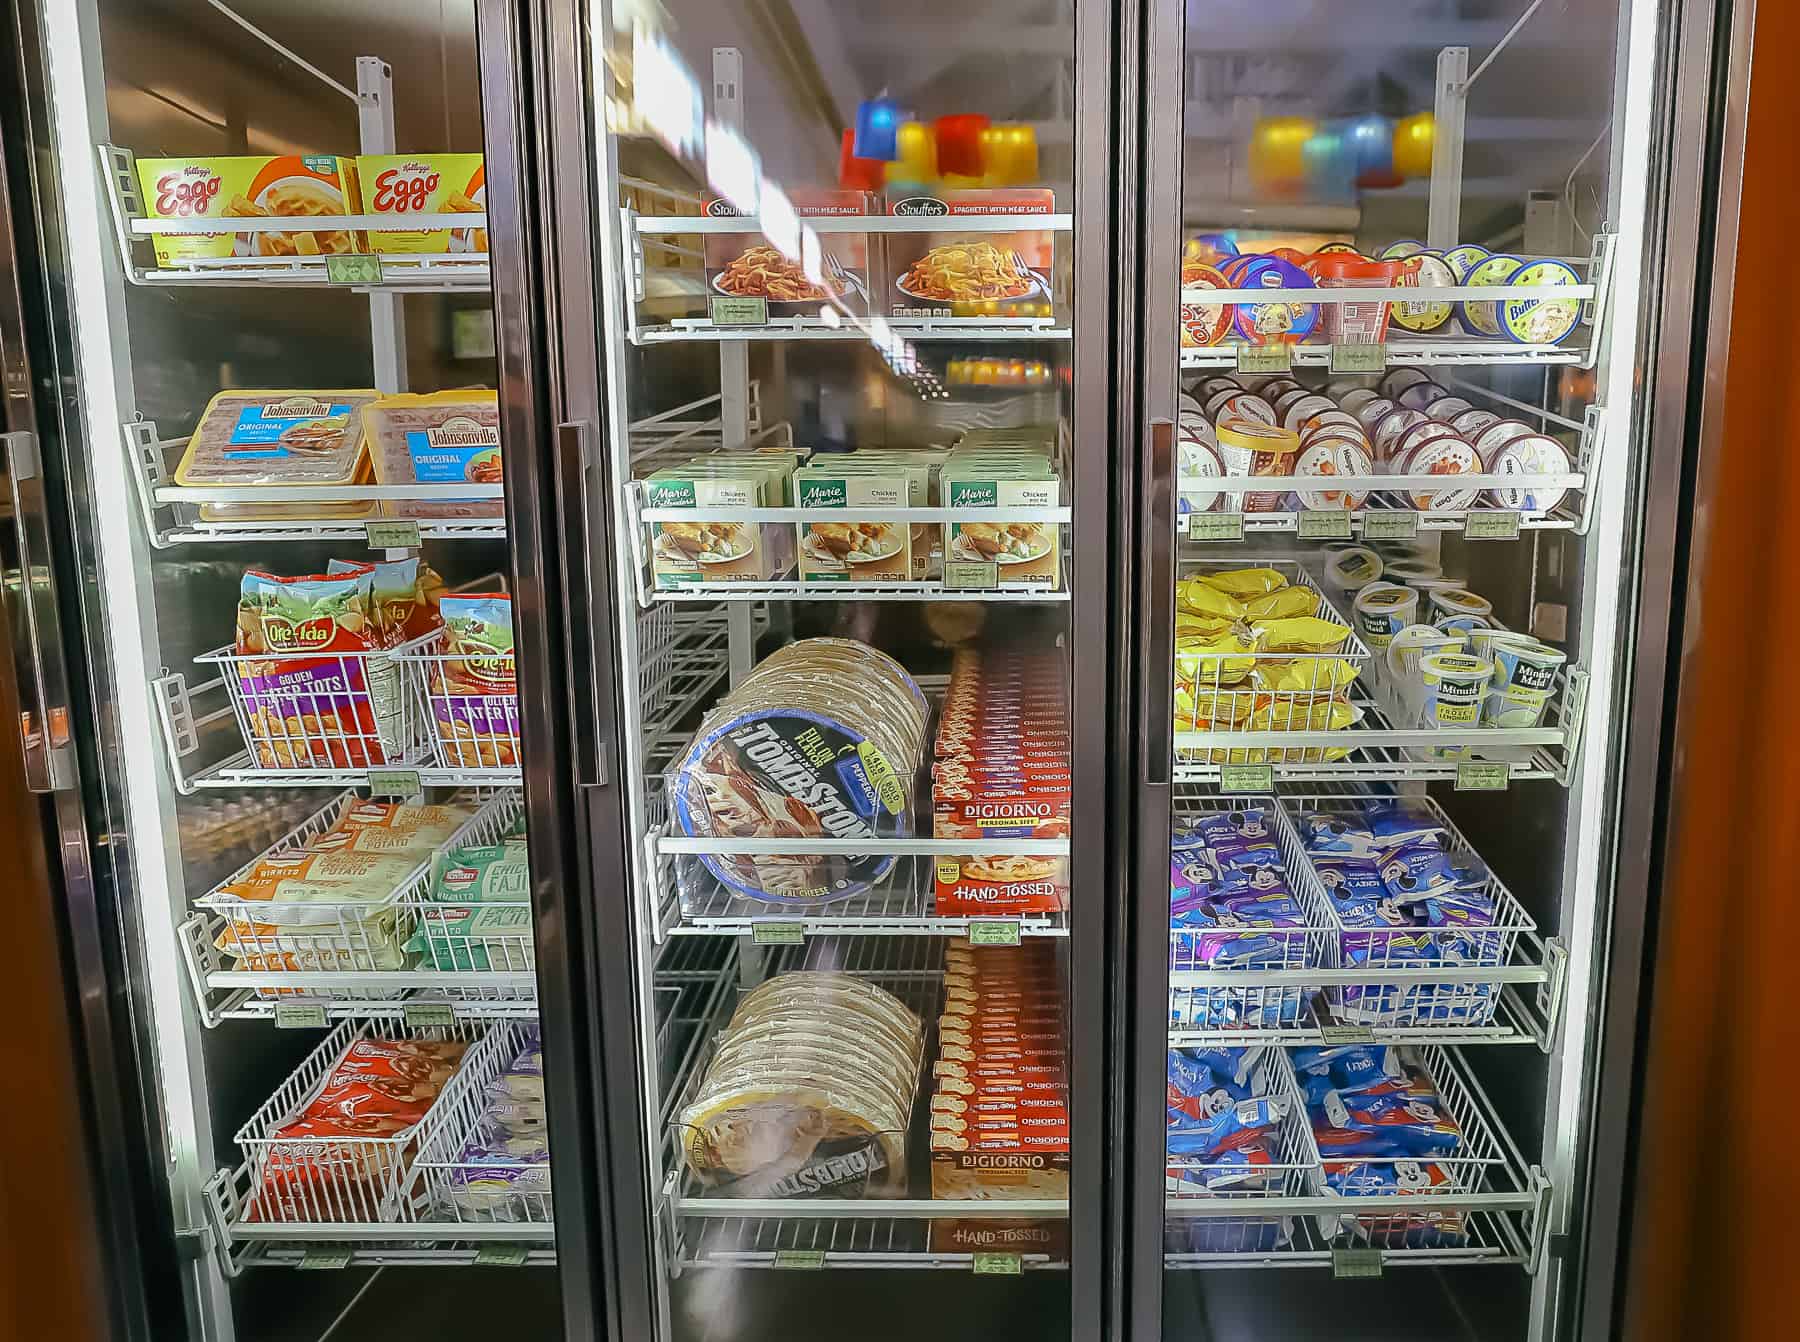 Frozen grocery items like waffles, pizza, pot pies, and ice cream 